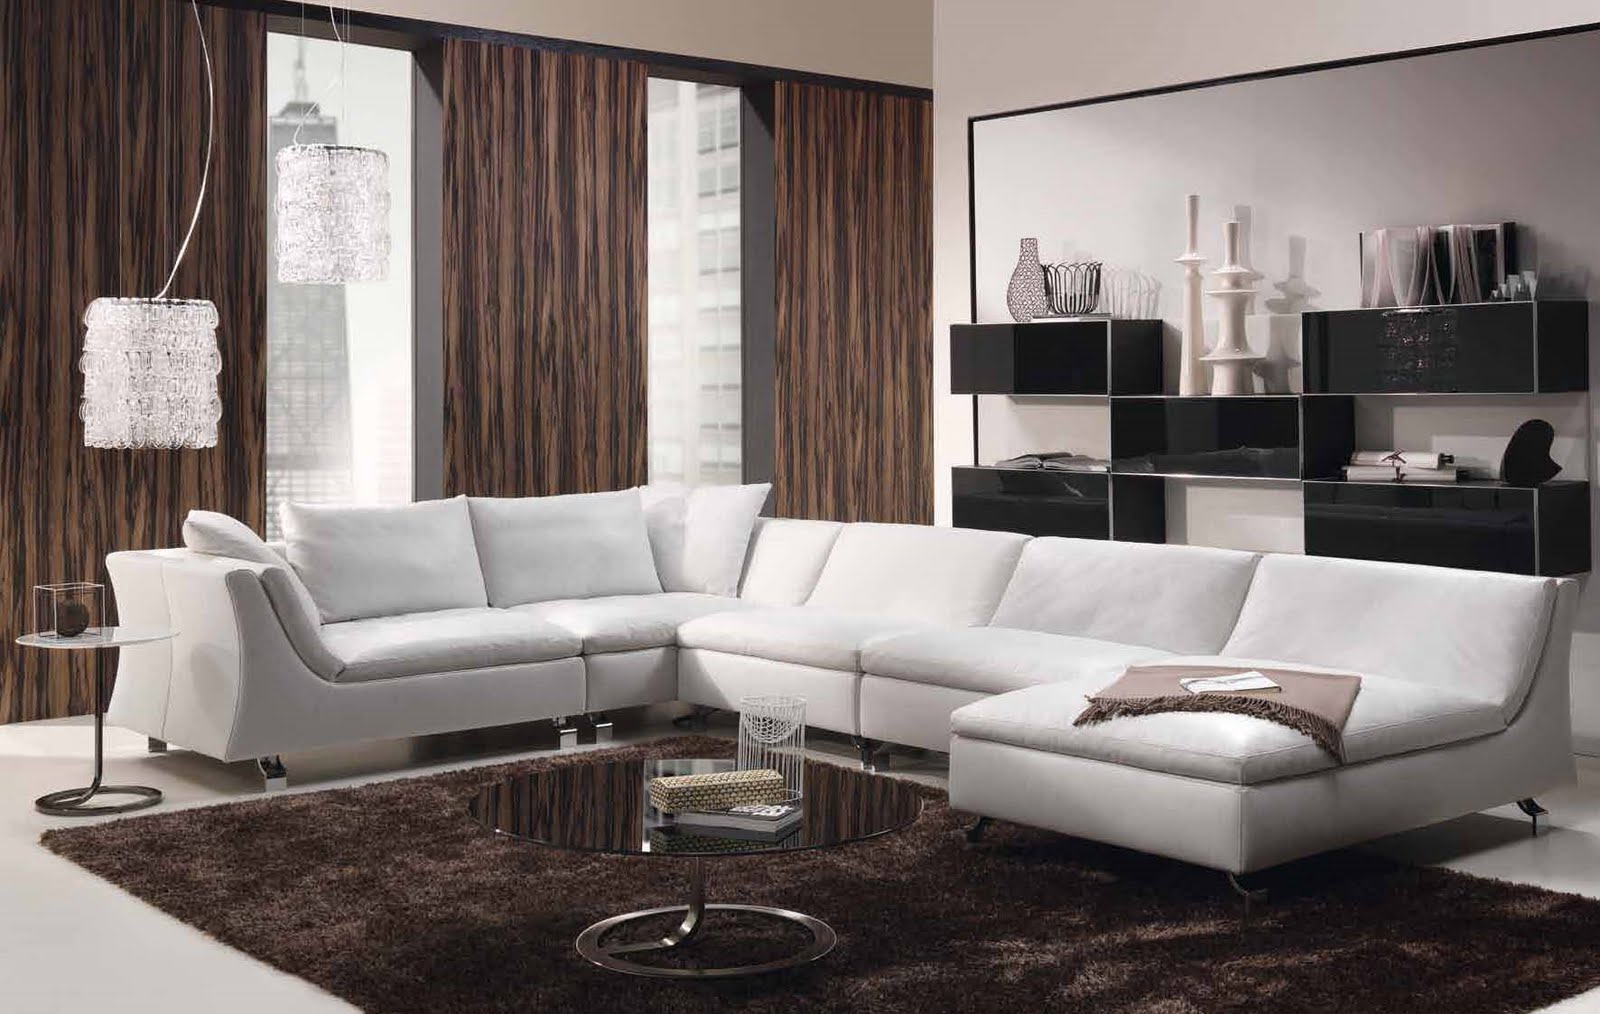 White Sectional In Amazing White Sectional Sofa Bed In Living Room Design With Sleek Round Table On Brown Soft Rug Furnished With Pedestal Nightstand And Completed With Crystal Pendant Lamps Living Room Stylish And Simply Living Room Design